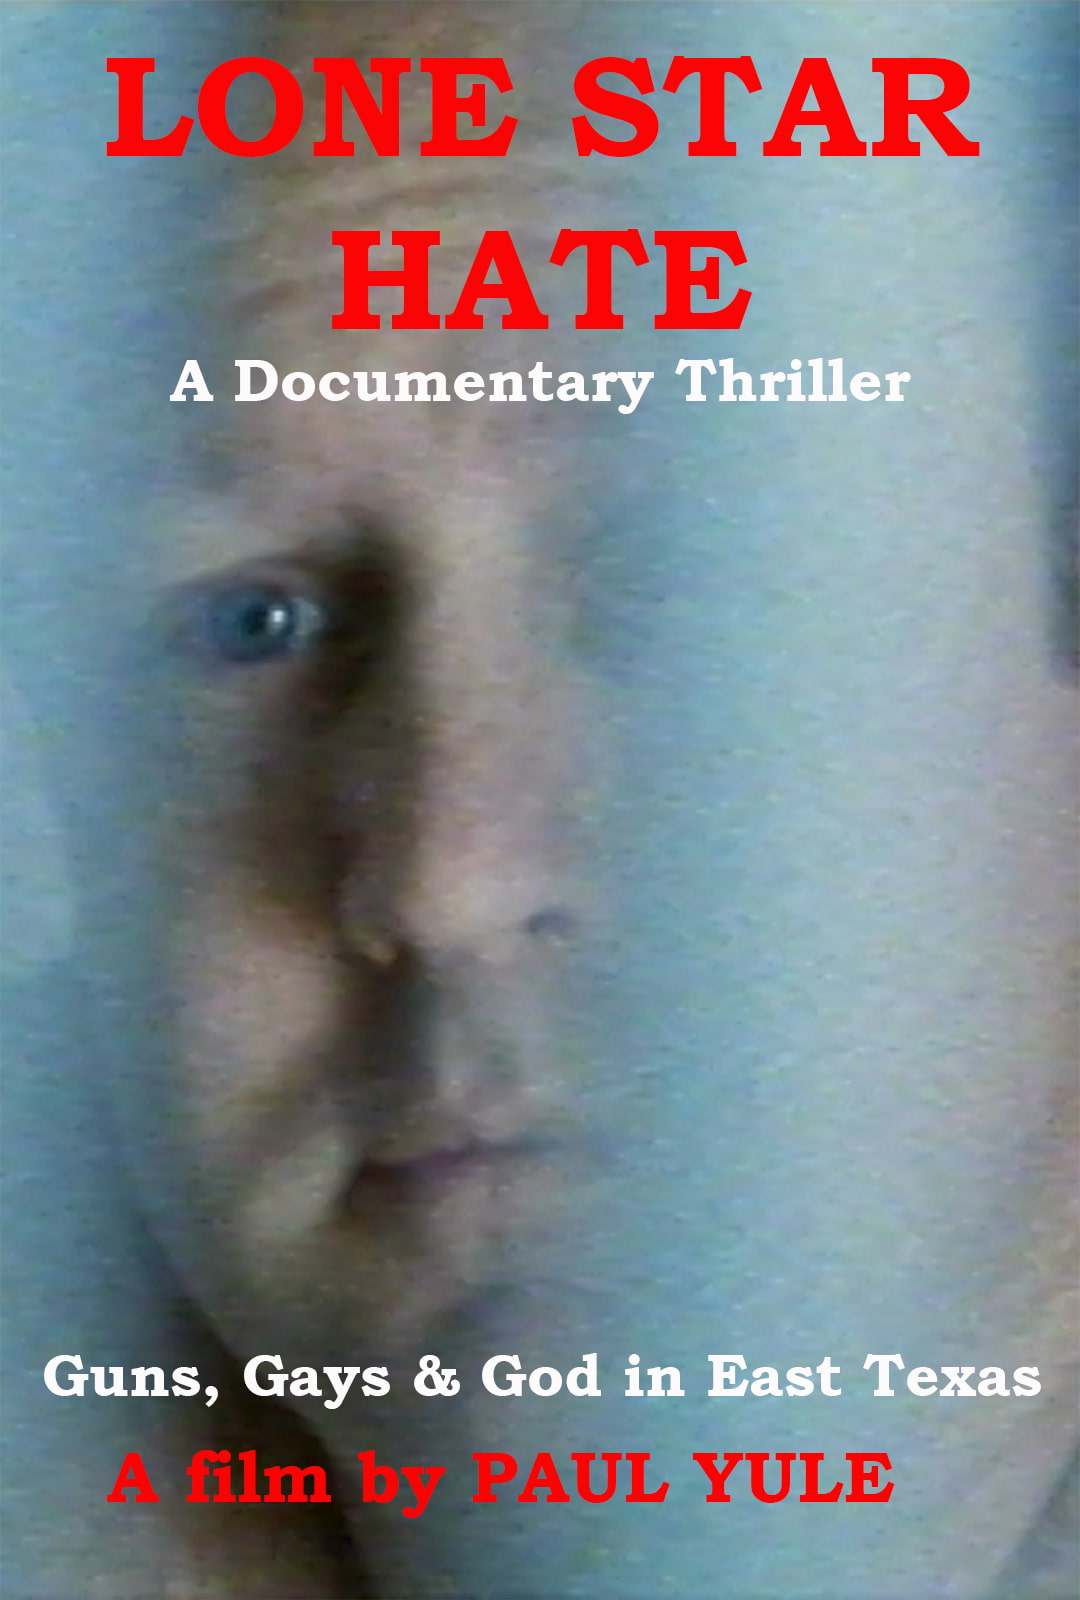 Lone Star Hate - Documentary Thriller Set In East Texas by Paul Yule